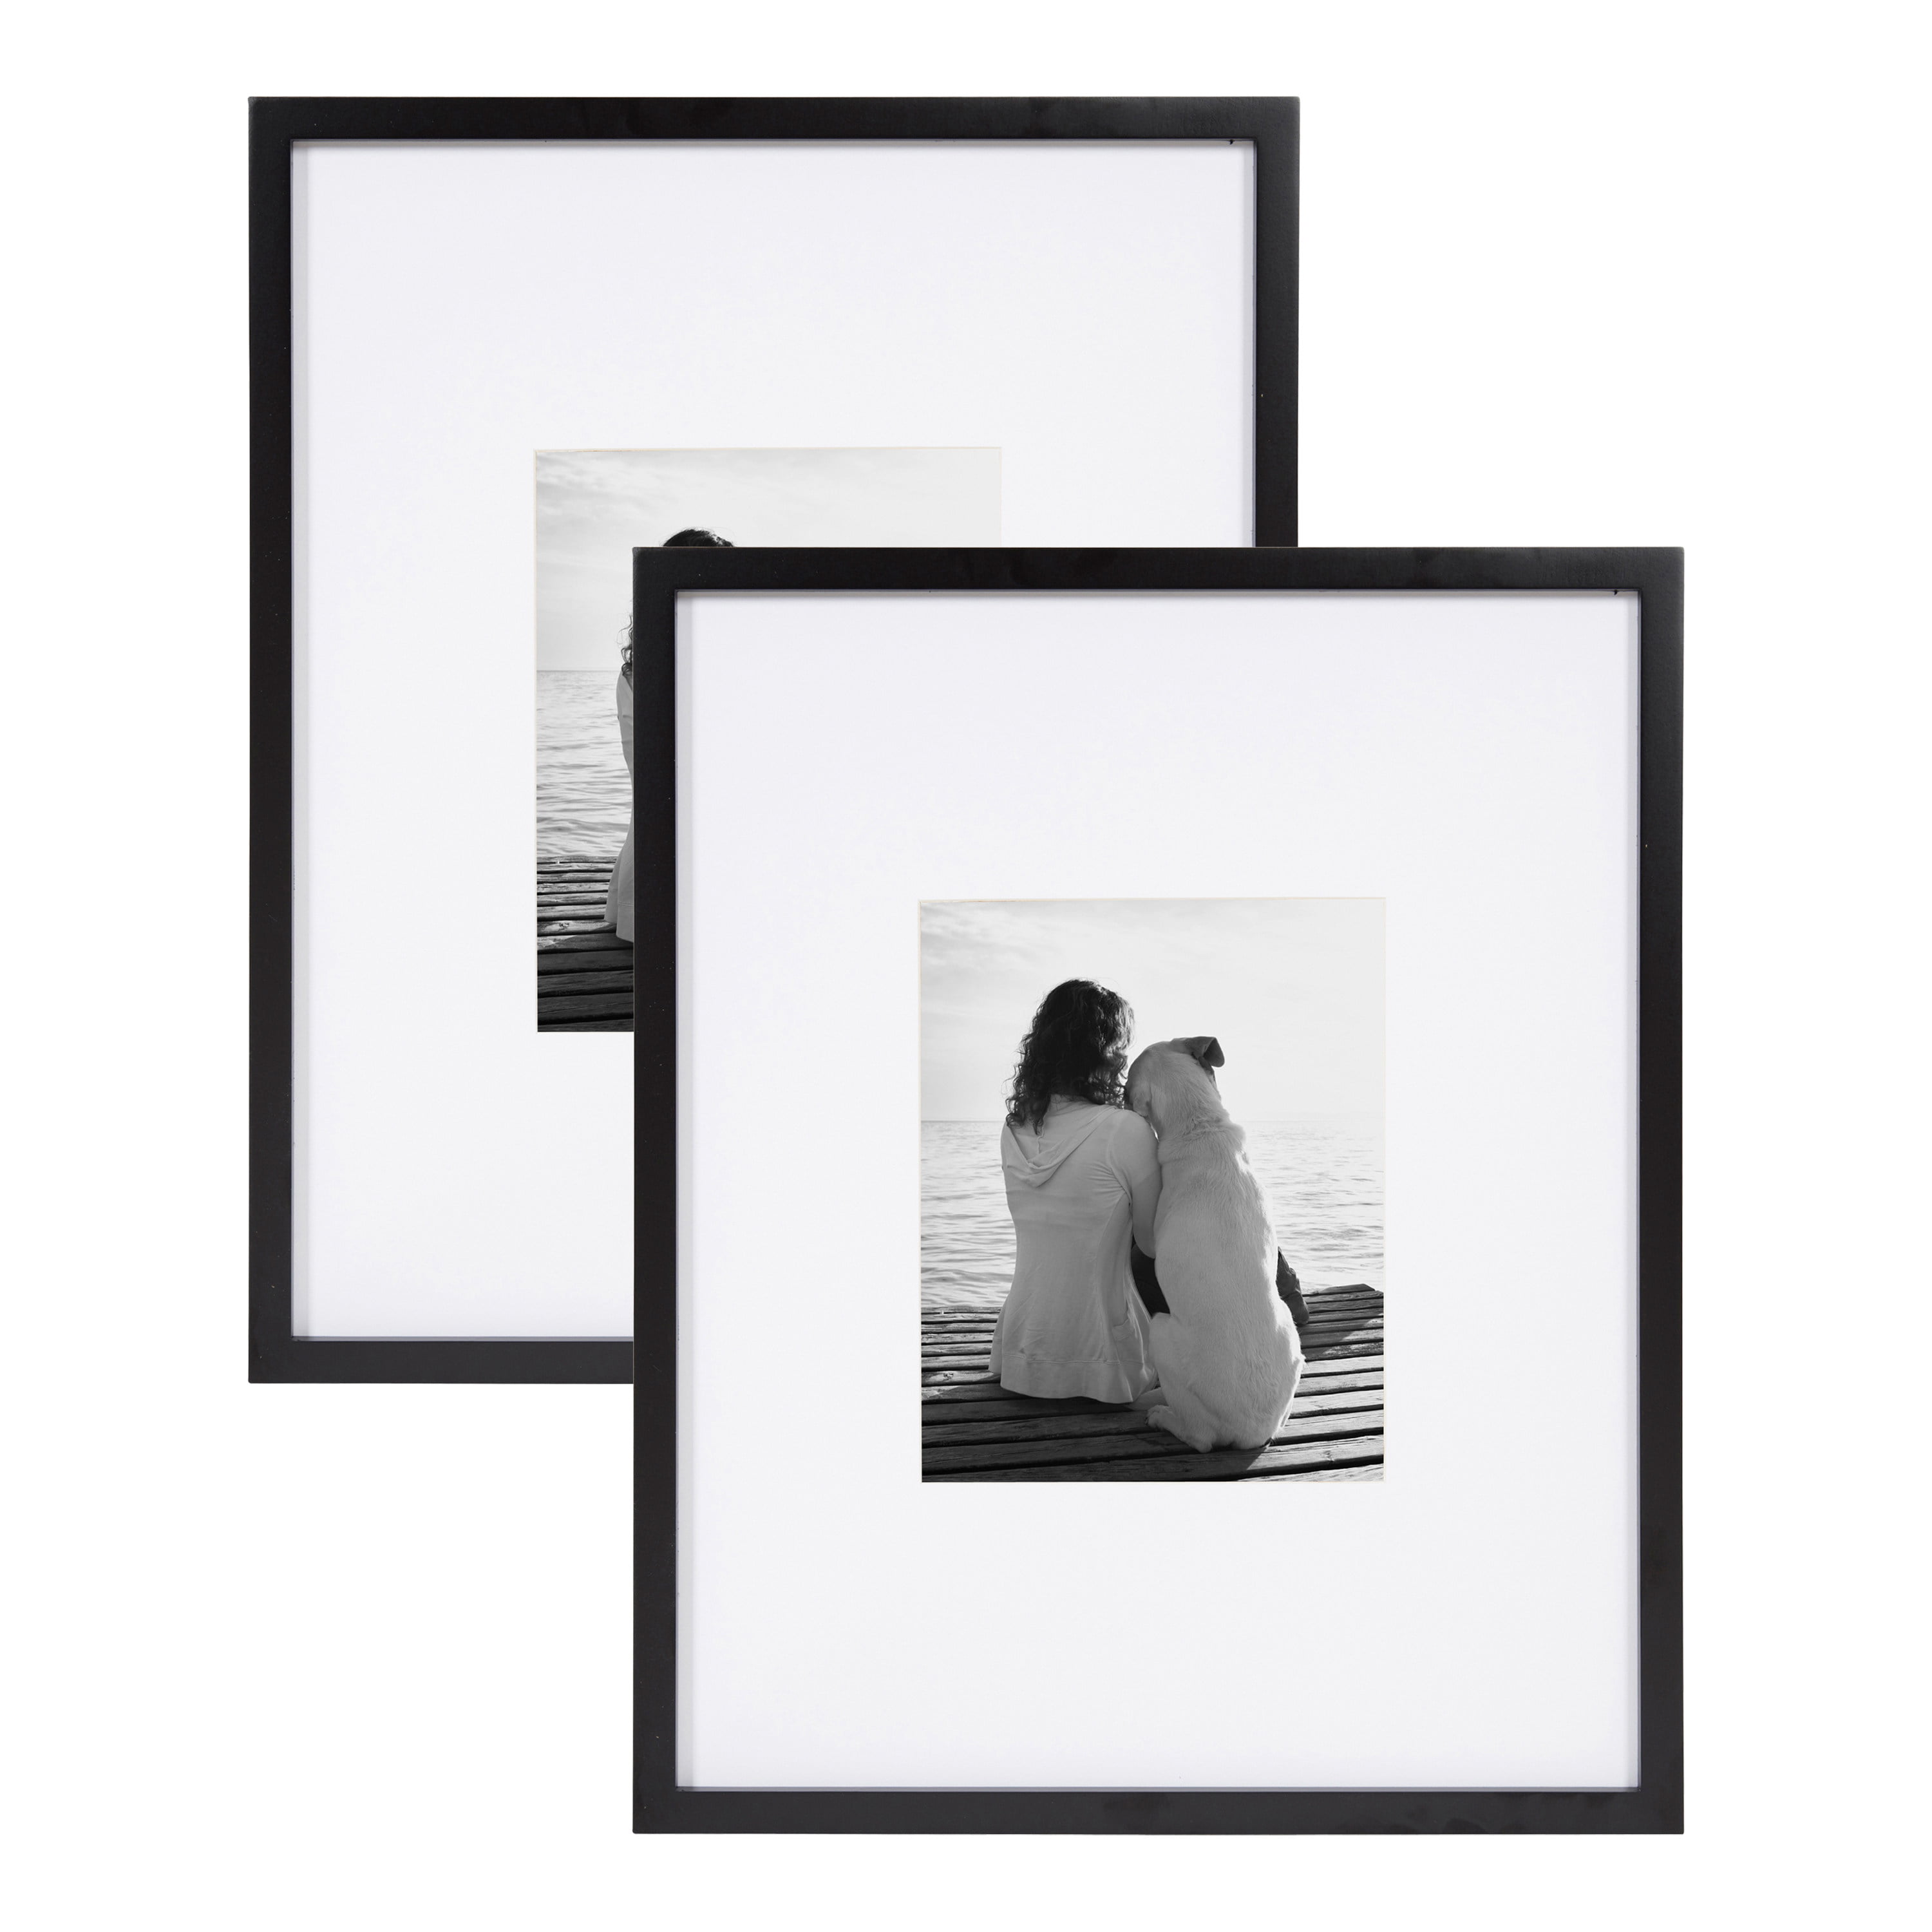 16 Pieces/set Solid Wood Picture Photo Frame Set Black White